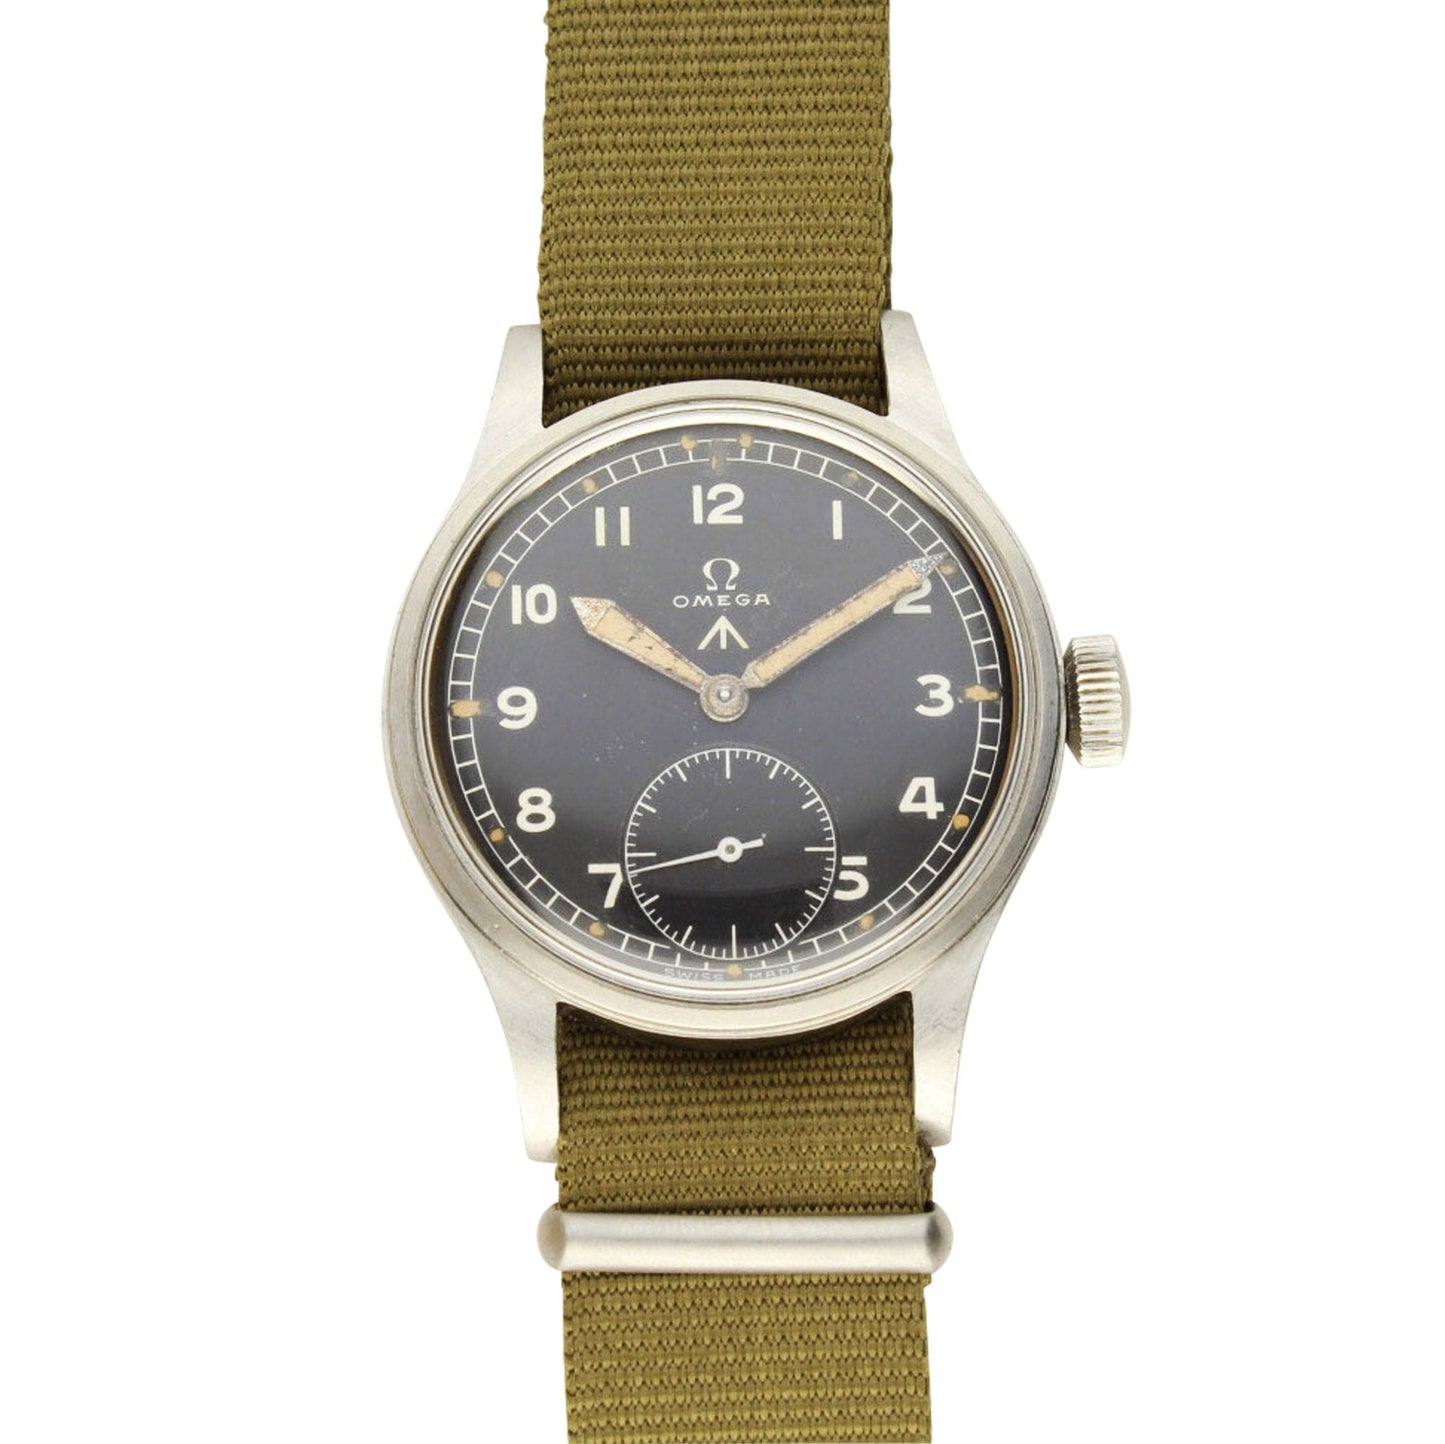 Stainless steel OMEGA British military watch, part of the "Dirty dozen". Made 1945